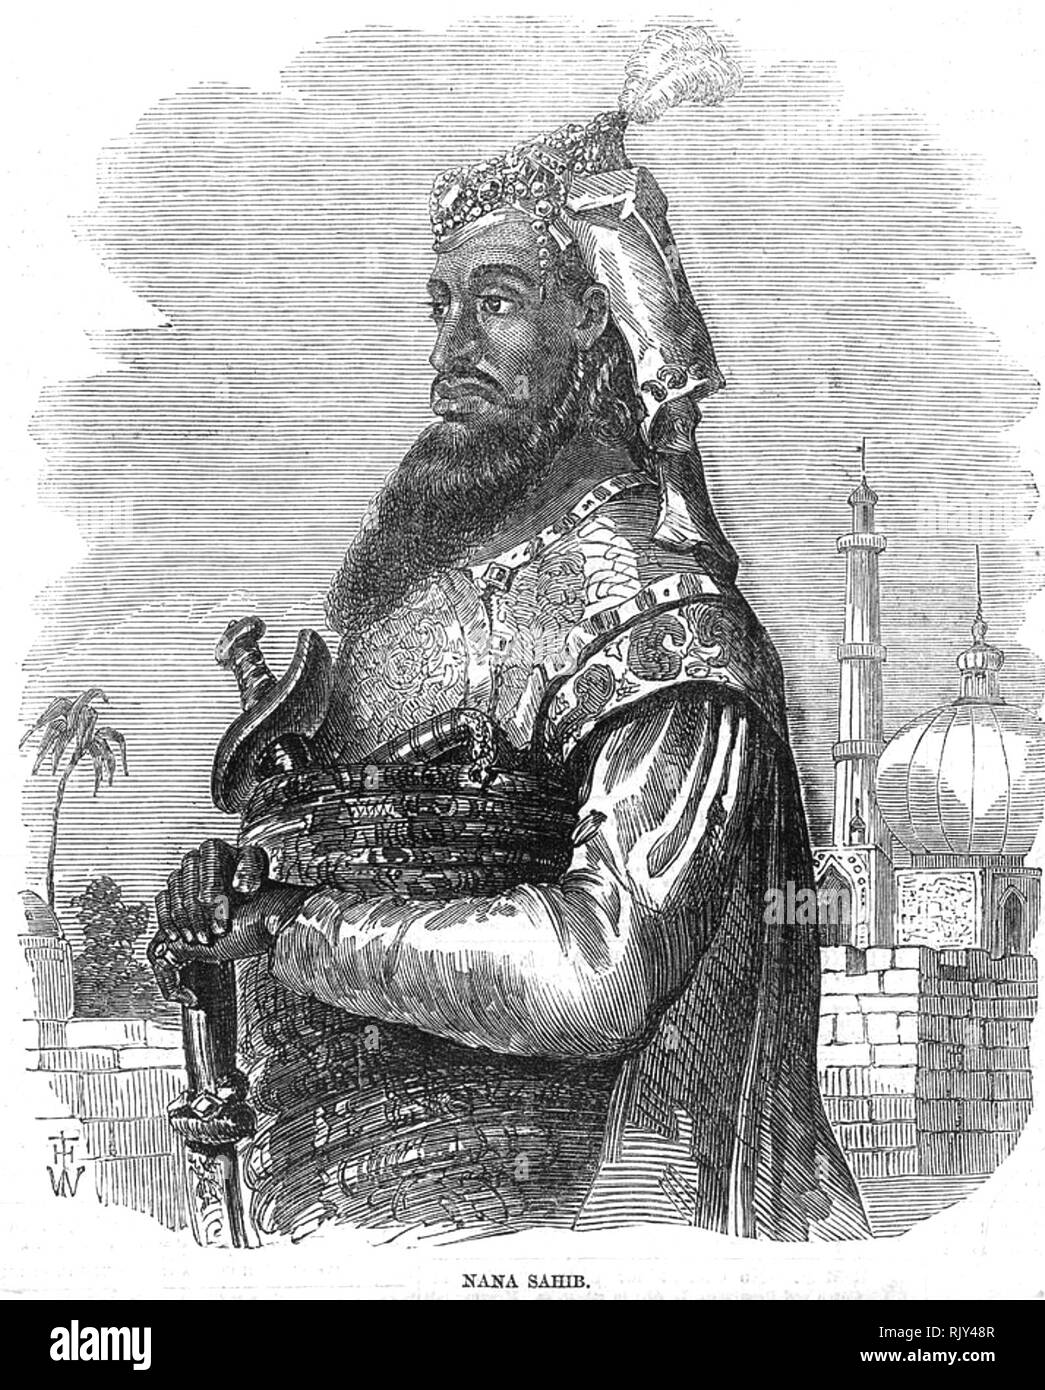 NANA SAHIB (1824-1859)  Indian  Maratha noble who led the rising in Cawnpore during the Indian Rebellion of 1857. From Illustrated London News,  1857. Stock Photo